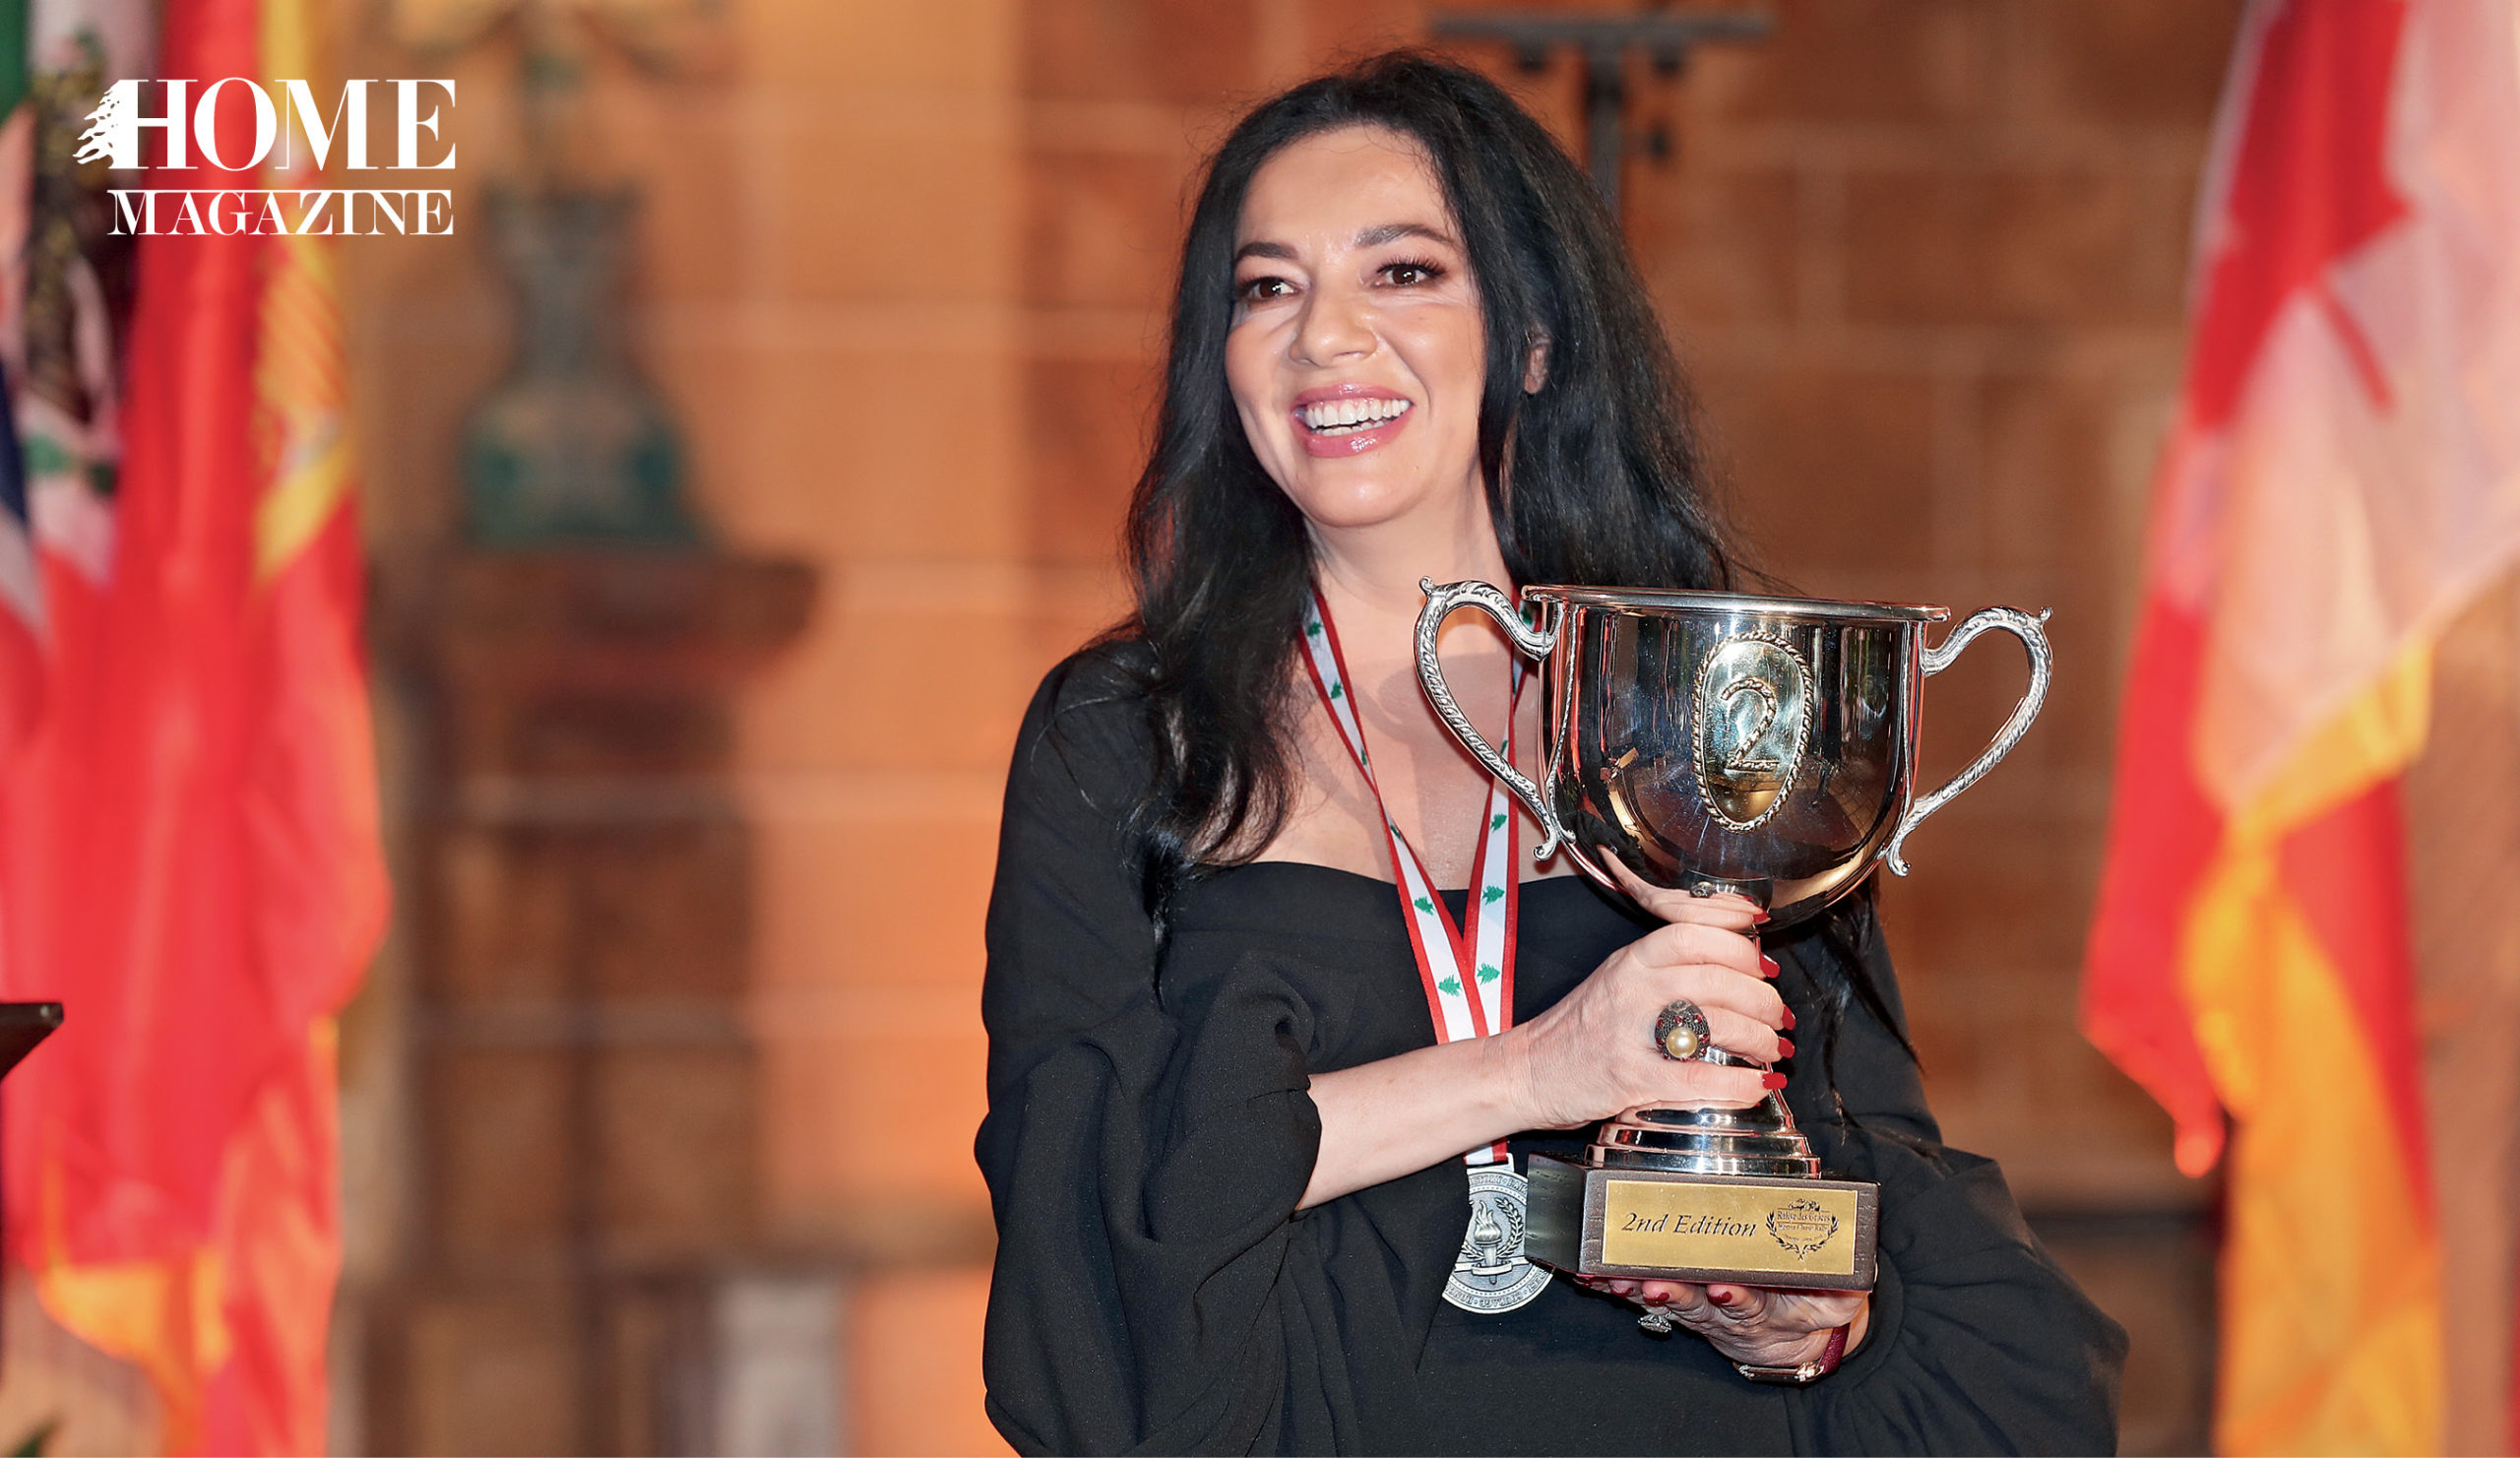 A woman with black hair and in a black dress holding a trophy and a medal around her neck